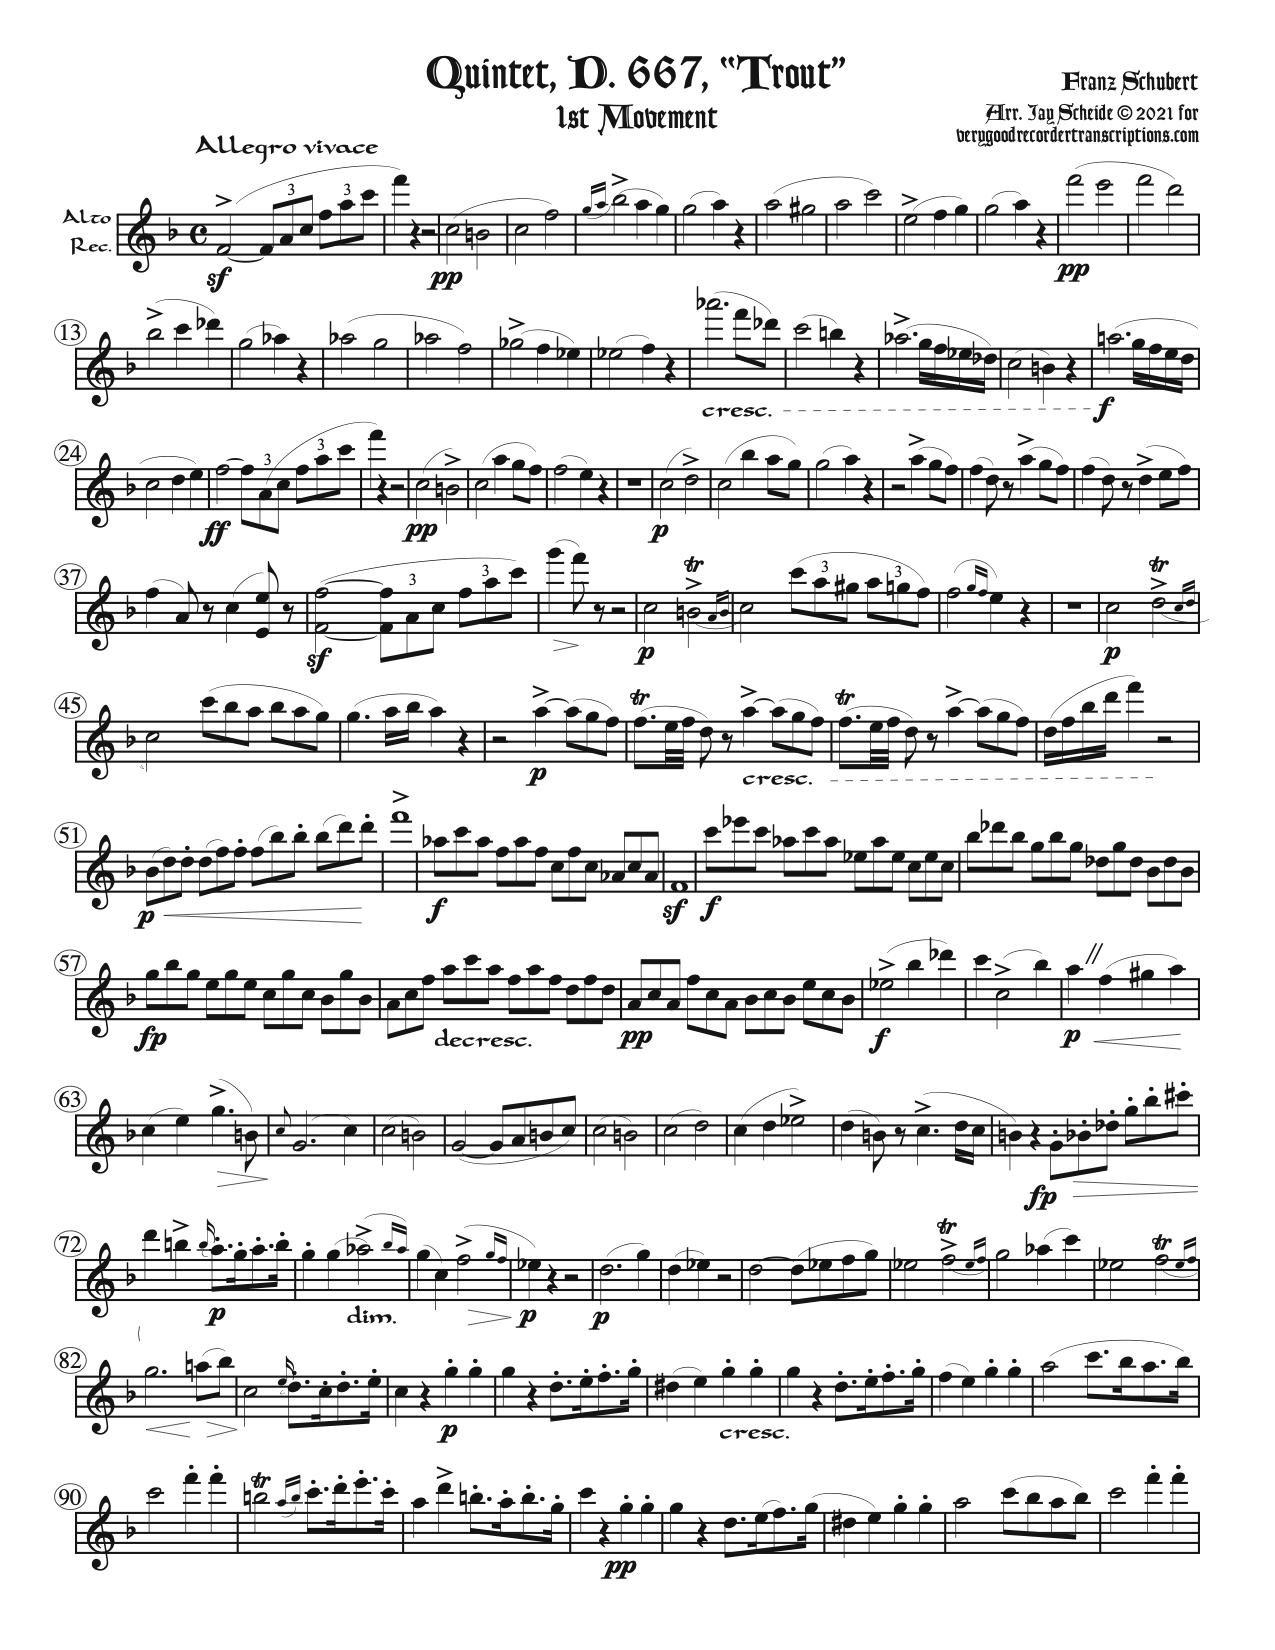 First movement from the “Trout” Quintet, D. 667